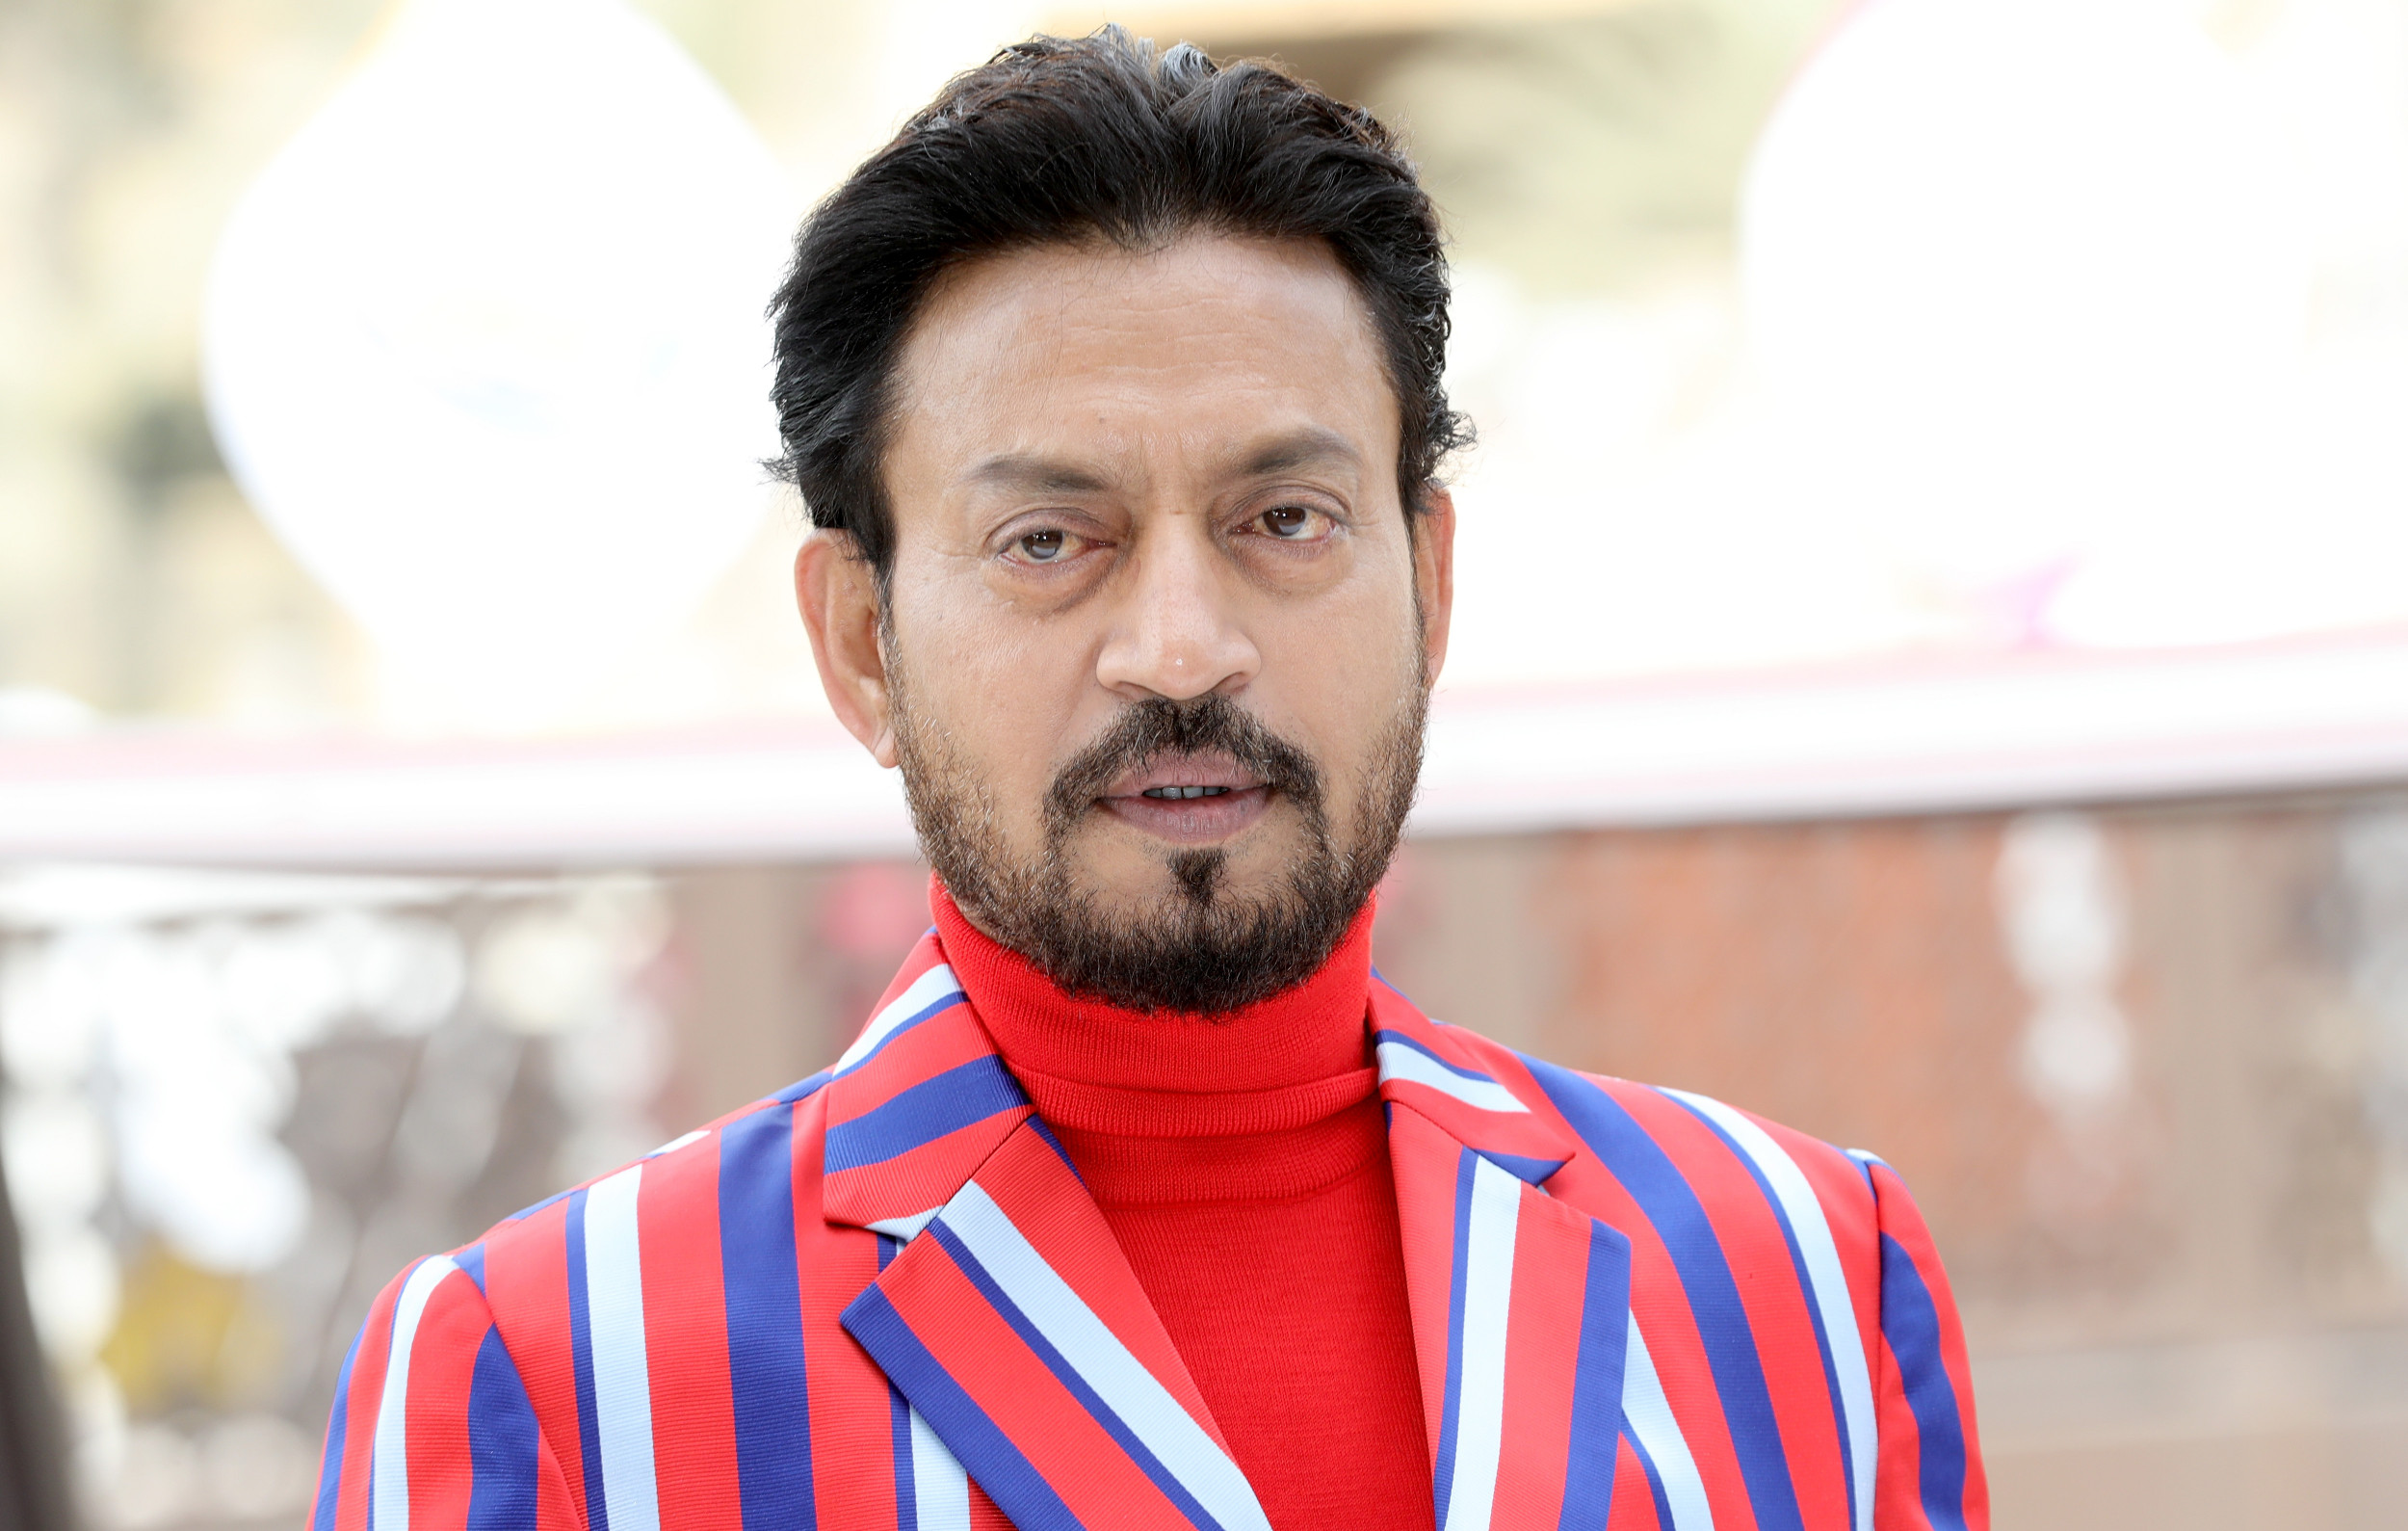 Bollywood Star Irrfan Khan Dies Aged 53 After Being Hospitalized For Colon Infection